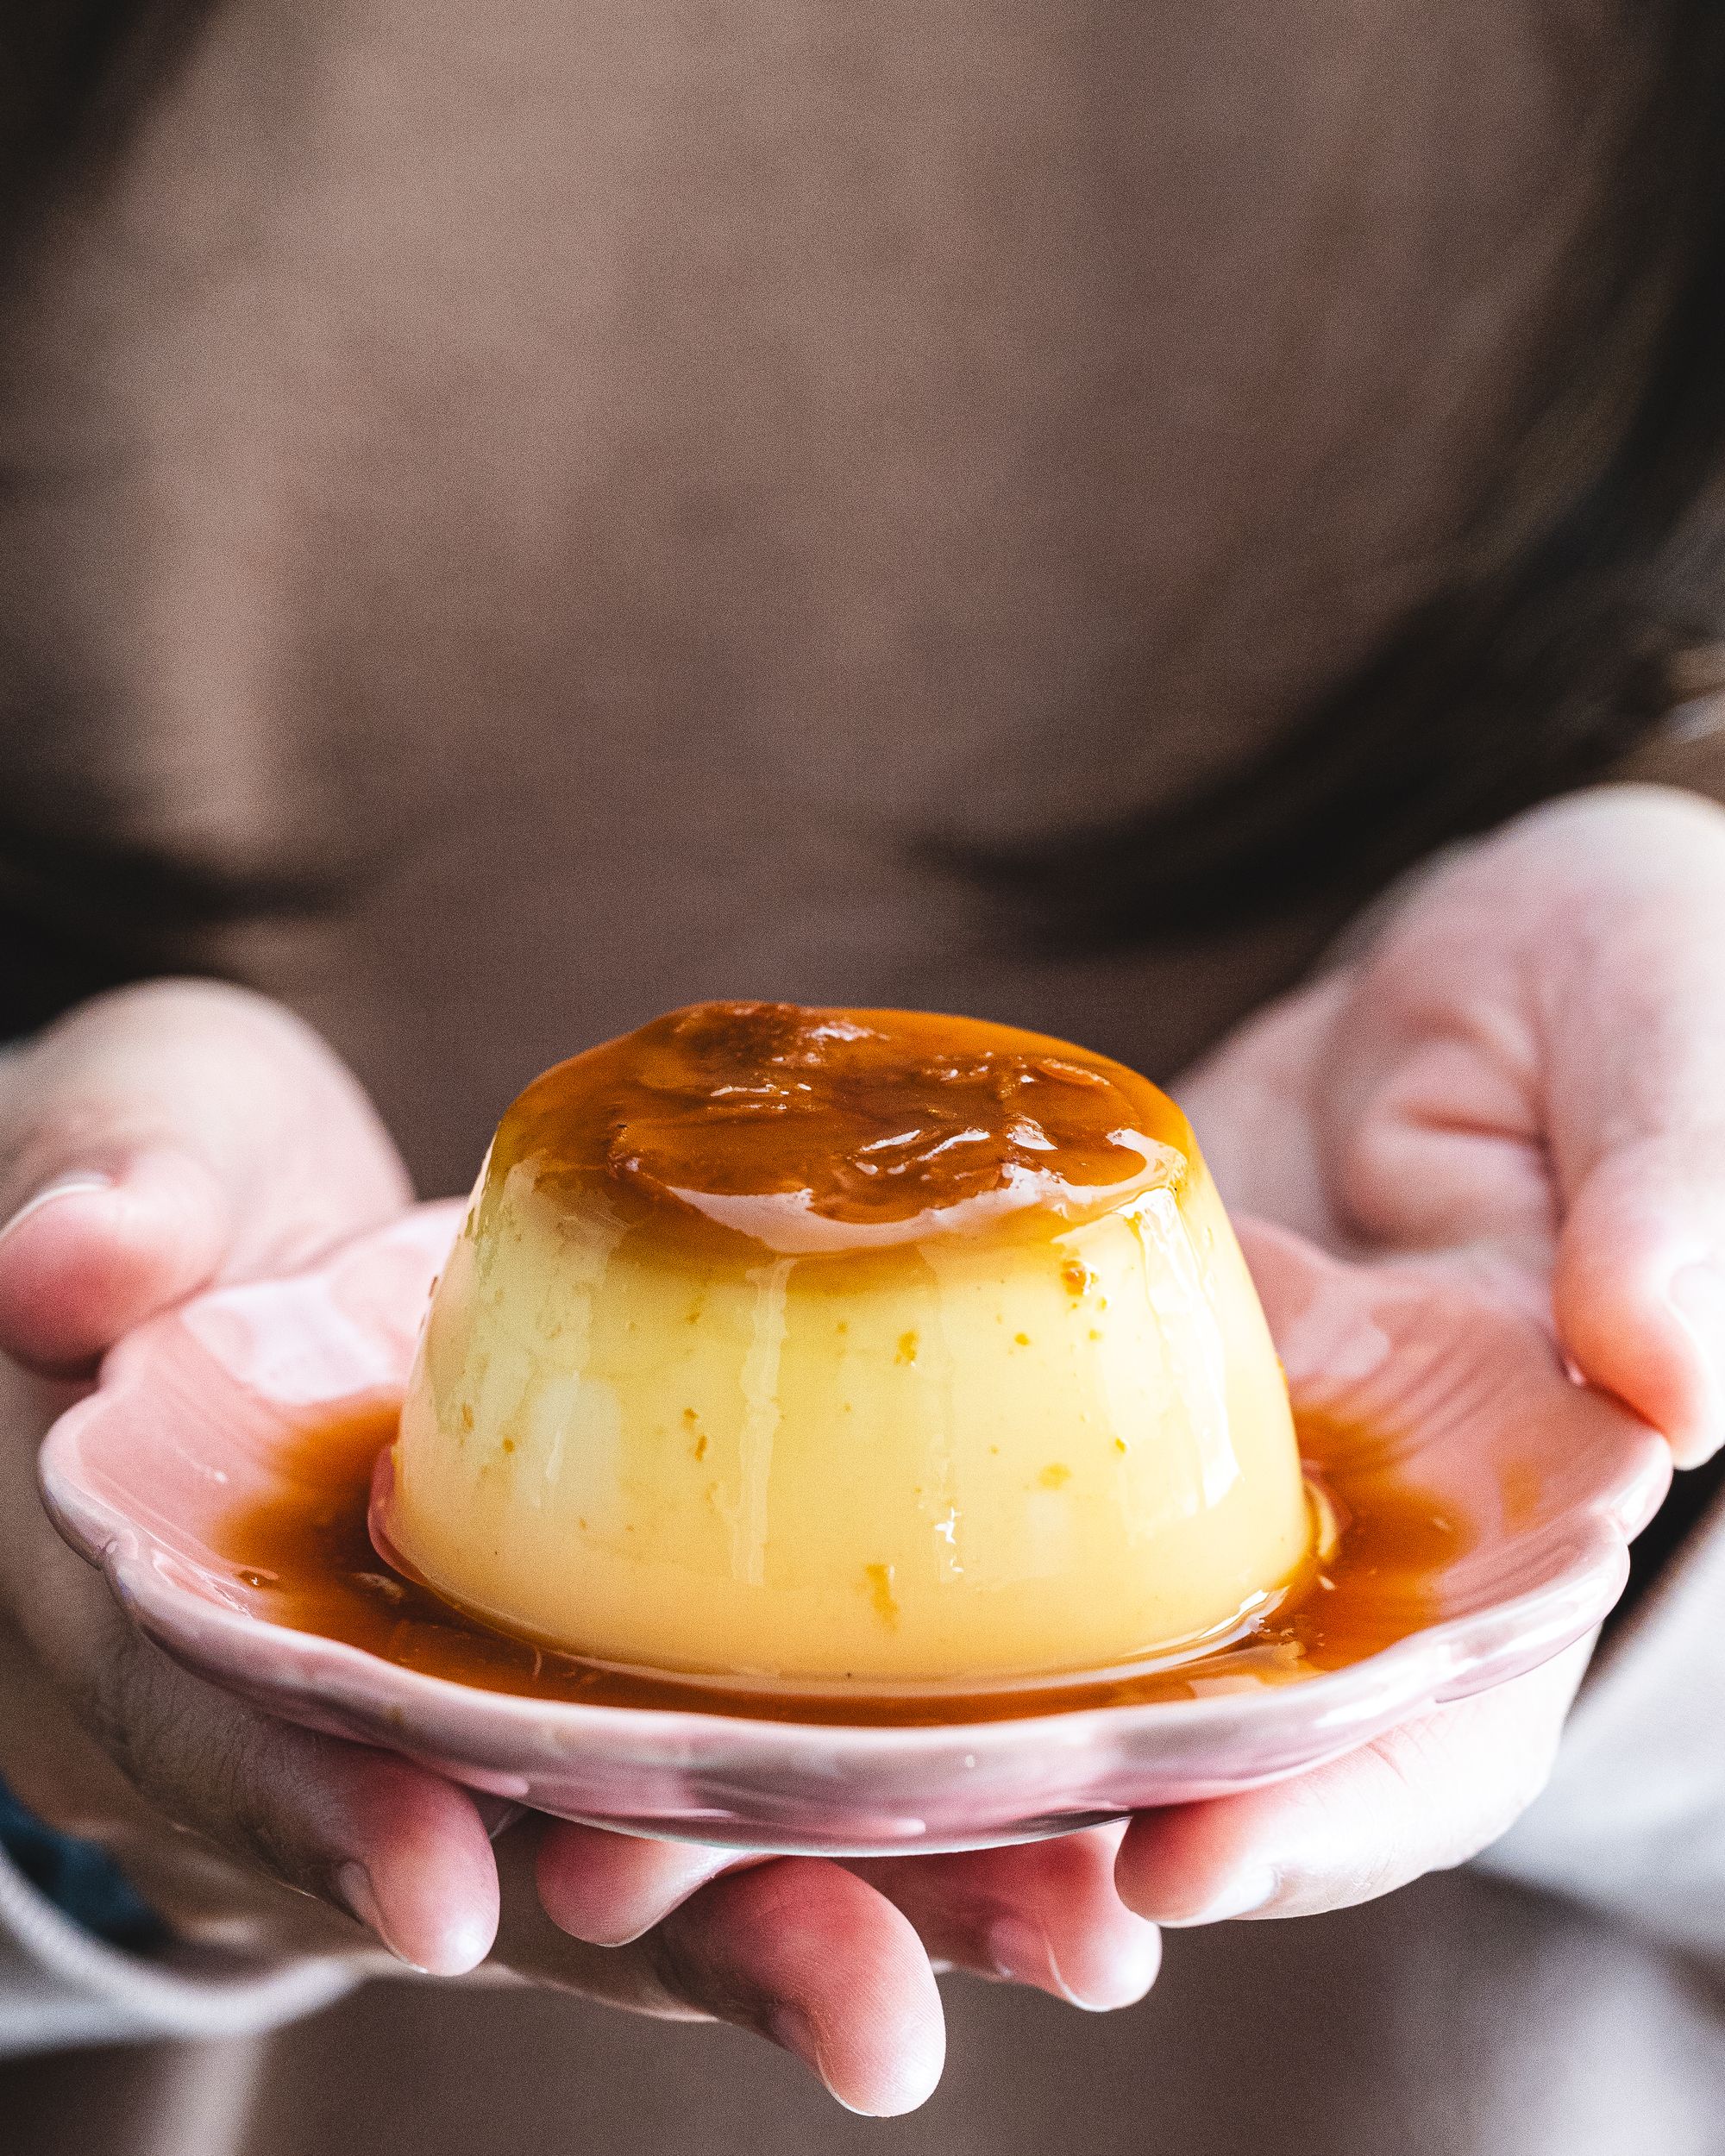 Hand holding Japanese pudding on a small flower shape plate